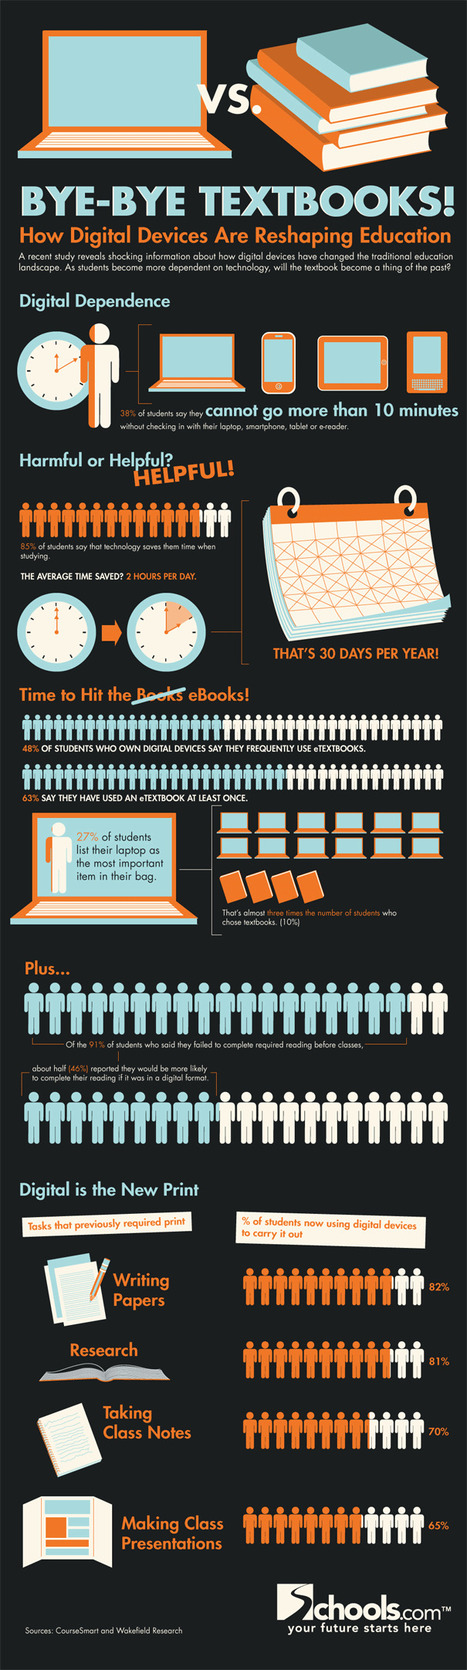 Bye-Bye Textbooks! How Digital Devices Are Reshaping Education Infographic | iGeneration - 21st Century Education (Pedagogy & Digital Innovation) | Scoop.it